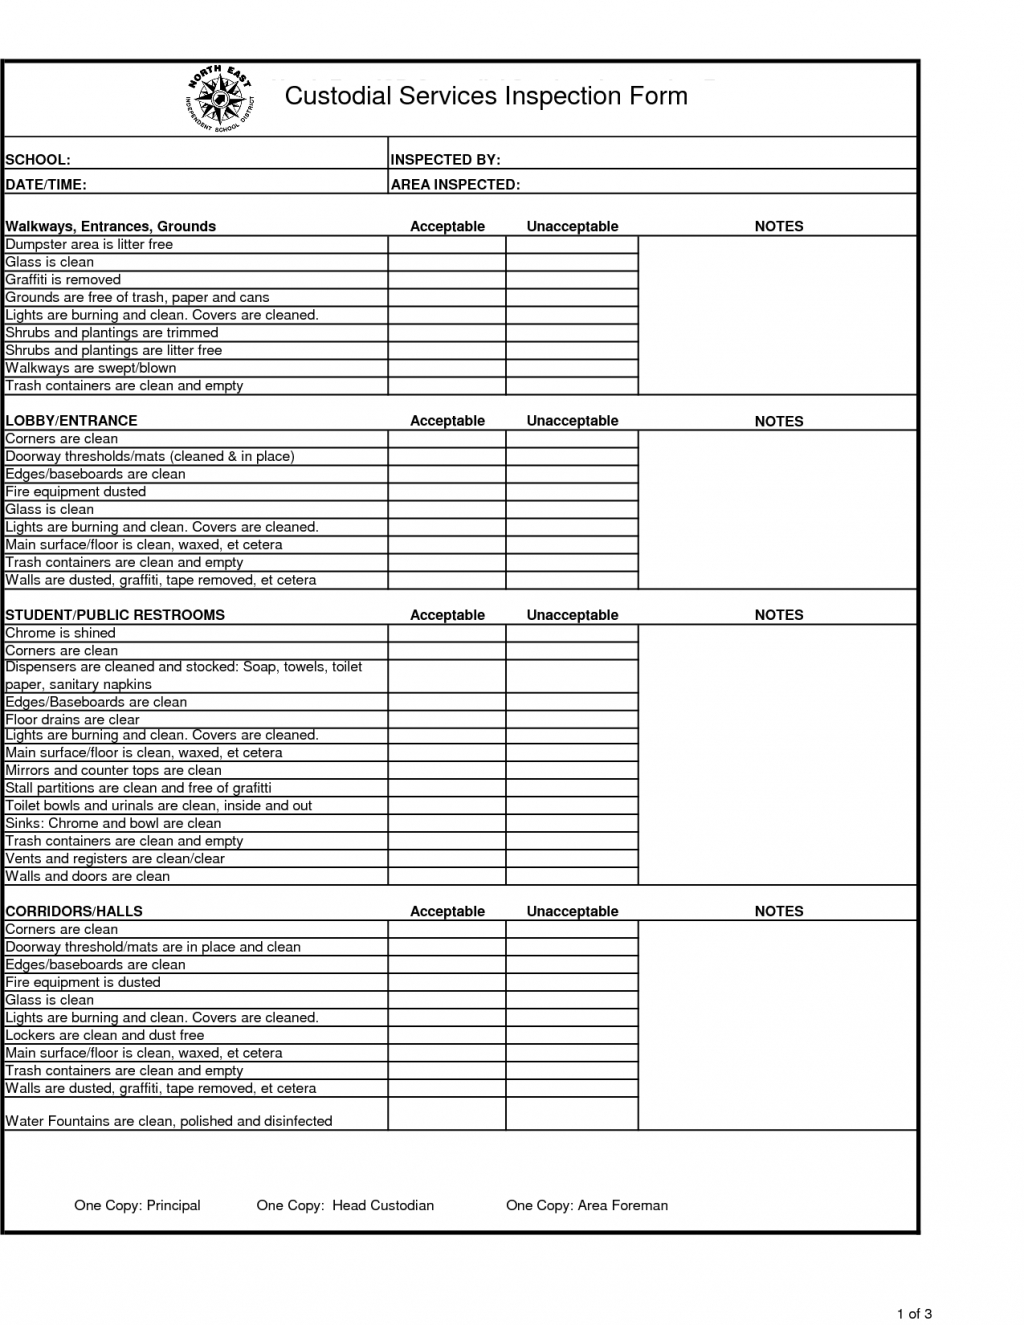 Inspection Spreadsheet Template Best Photos Of Free Throughout Vehicle Inspection Report Template